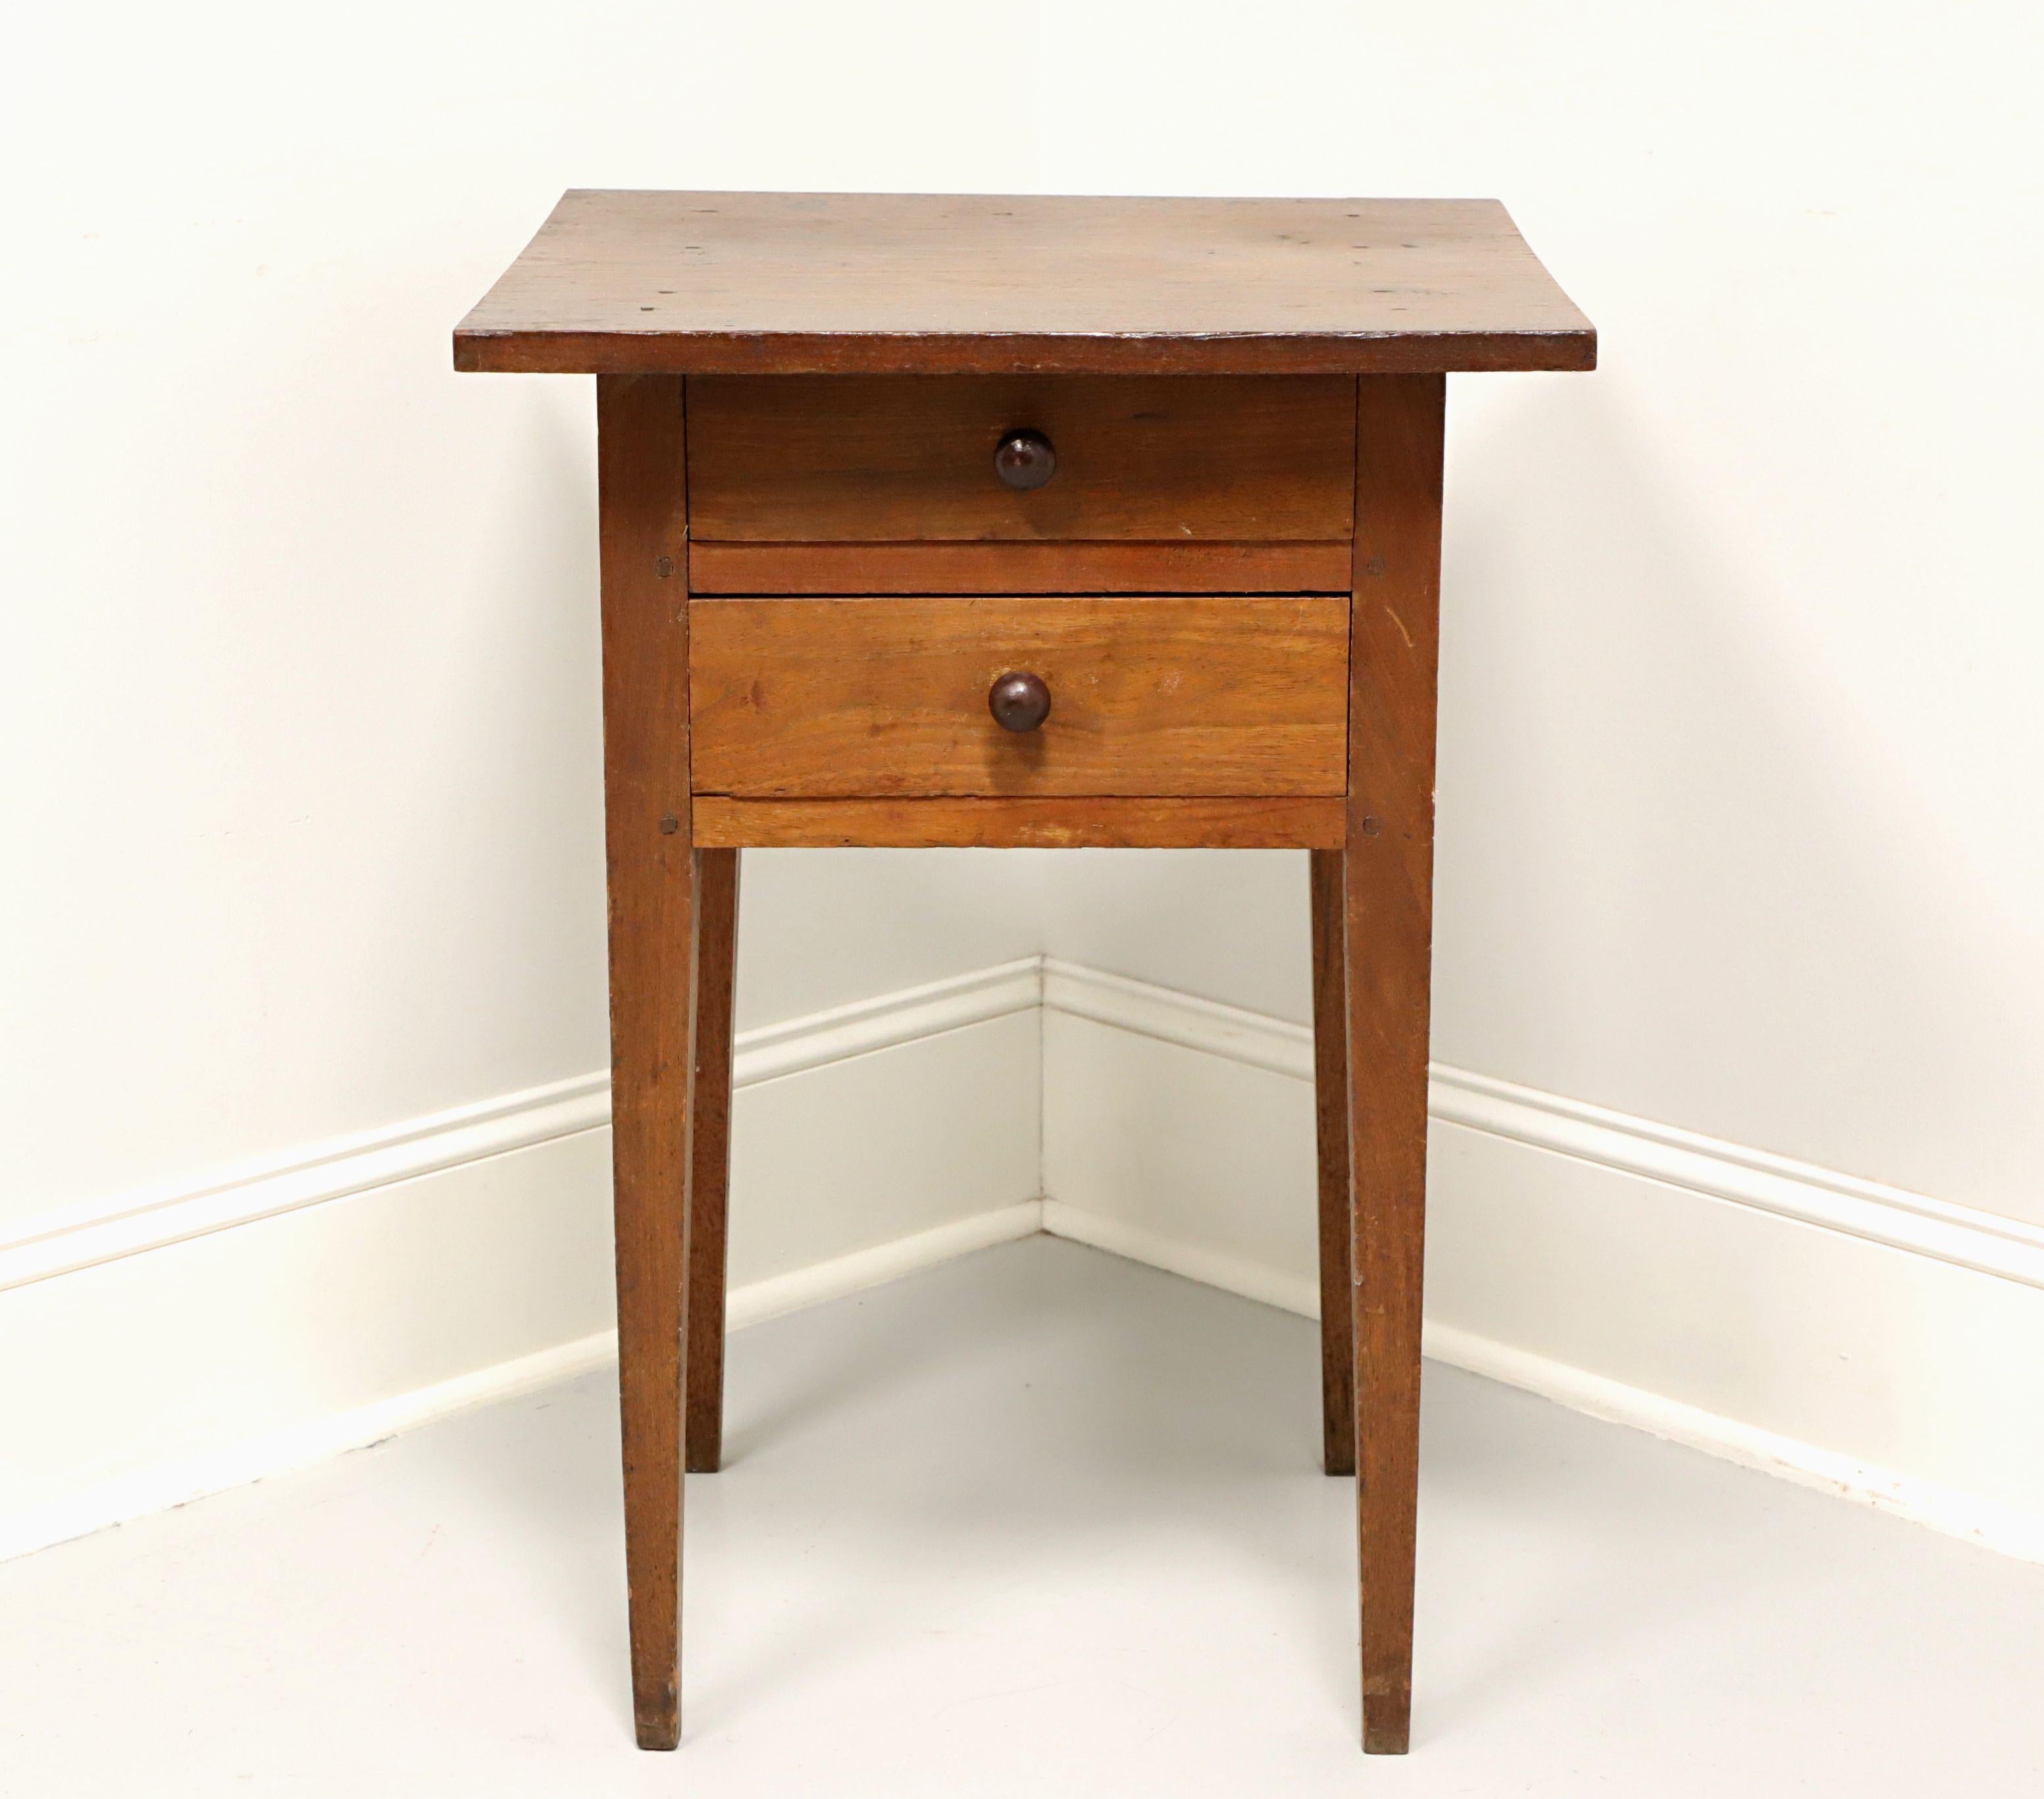 An antique 18th Century primitive side table, unbranded. Handcrafted of walnut, naturally distressed from age, polished wood knobs and tapered straight legs. Features two drawers of clout nail construction, top drawer having a fixed divider. Likely